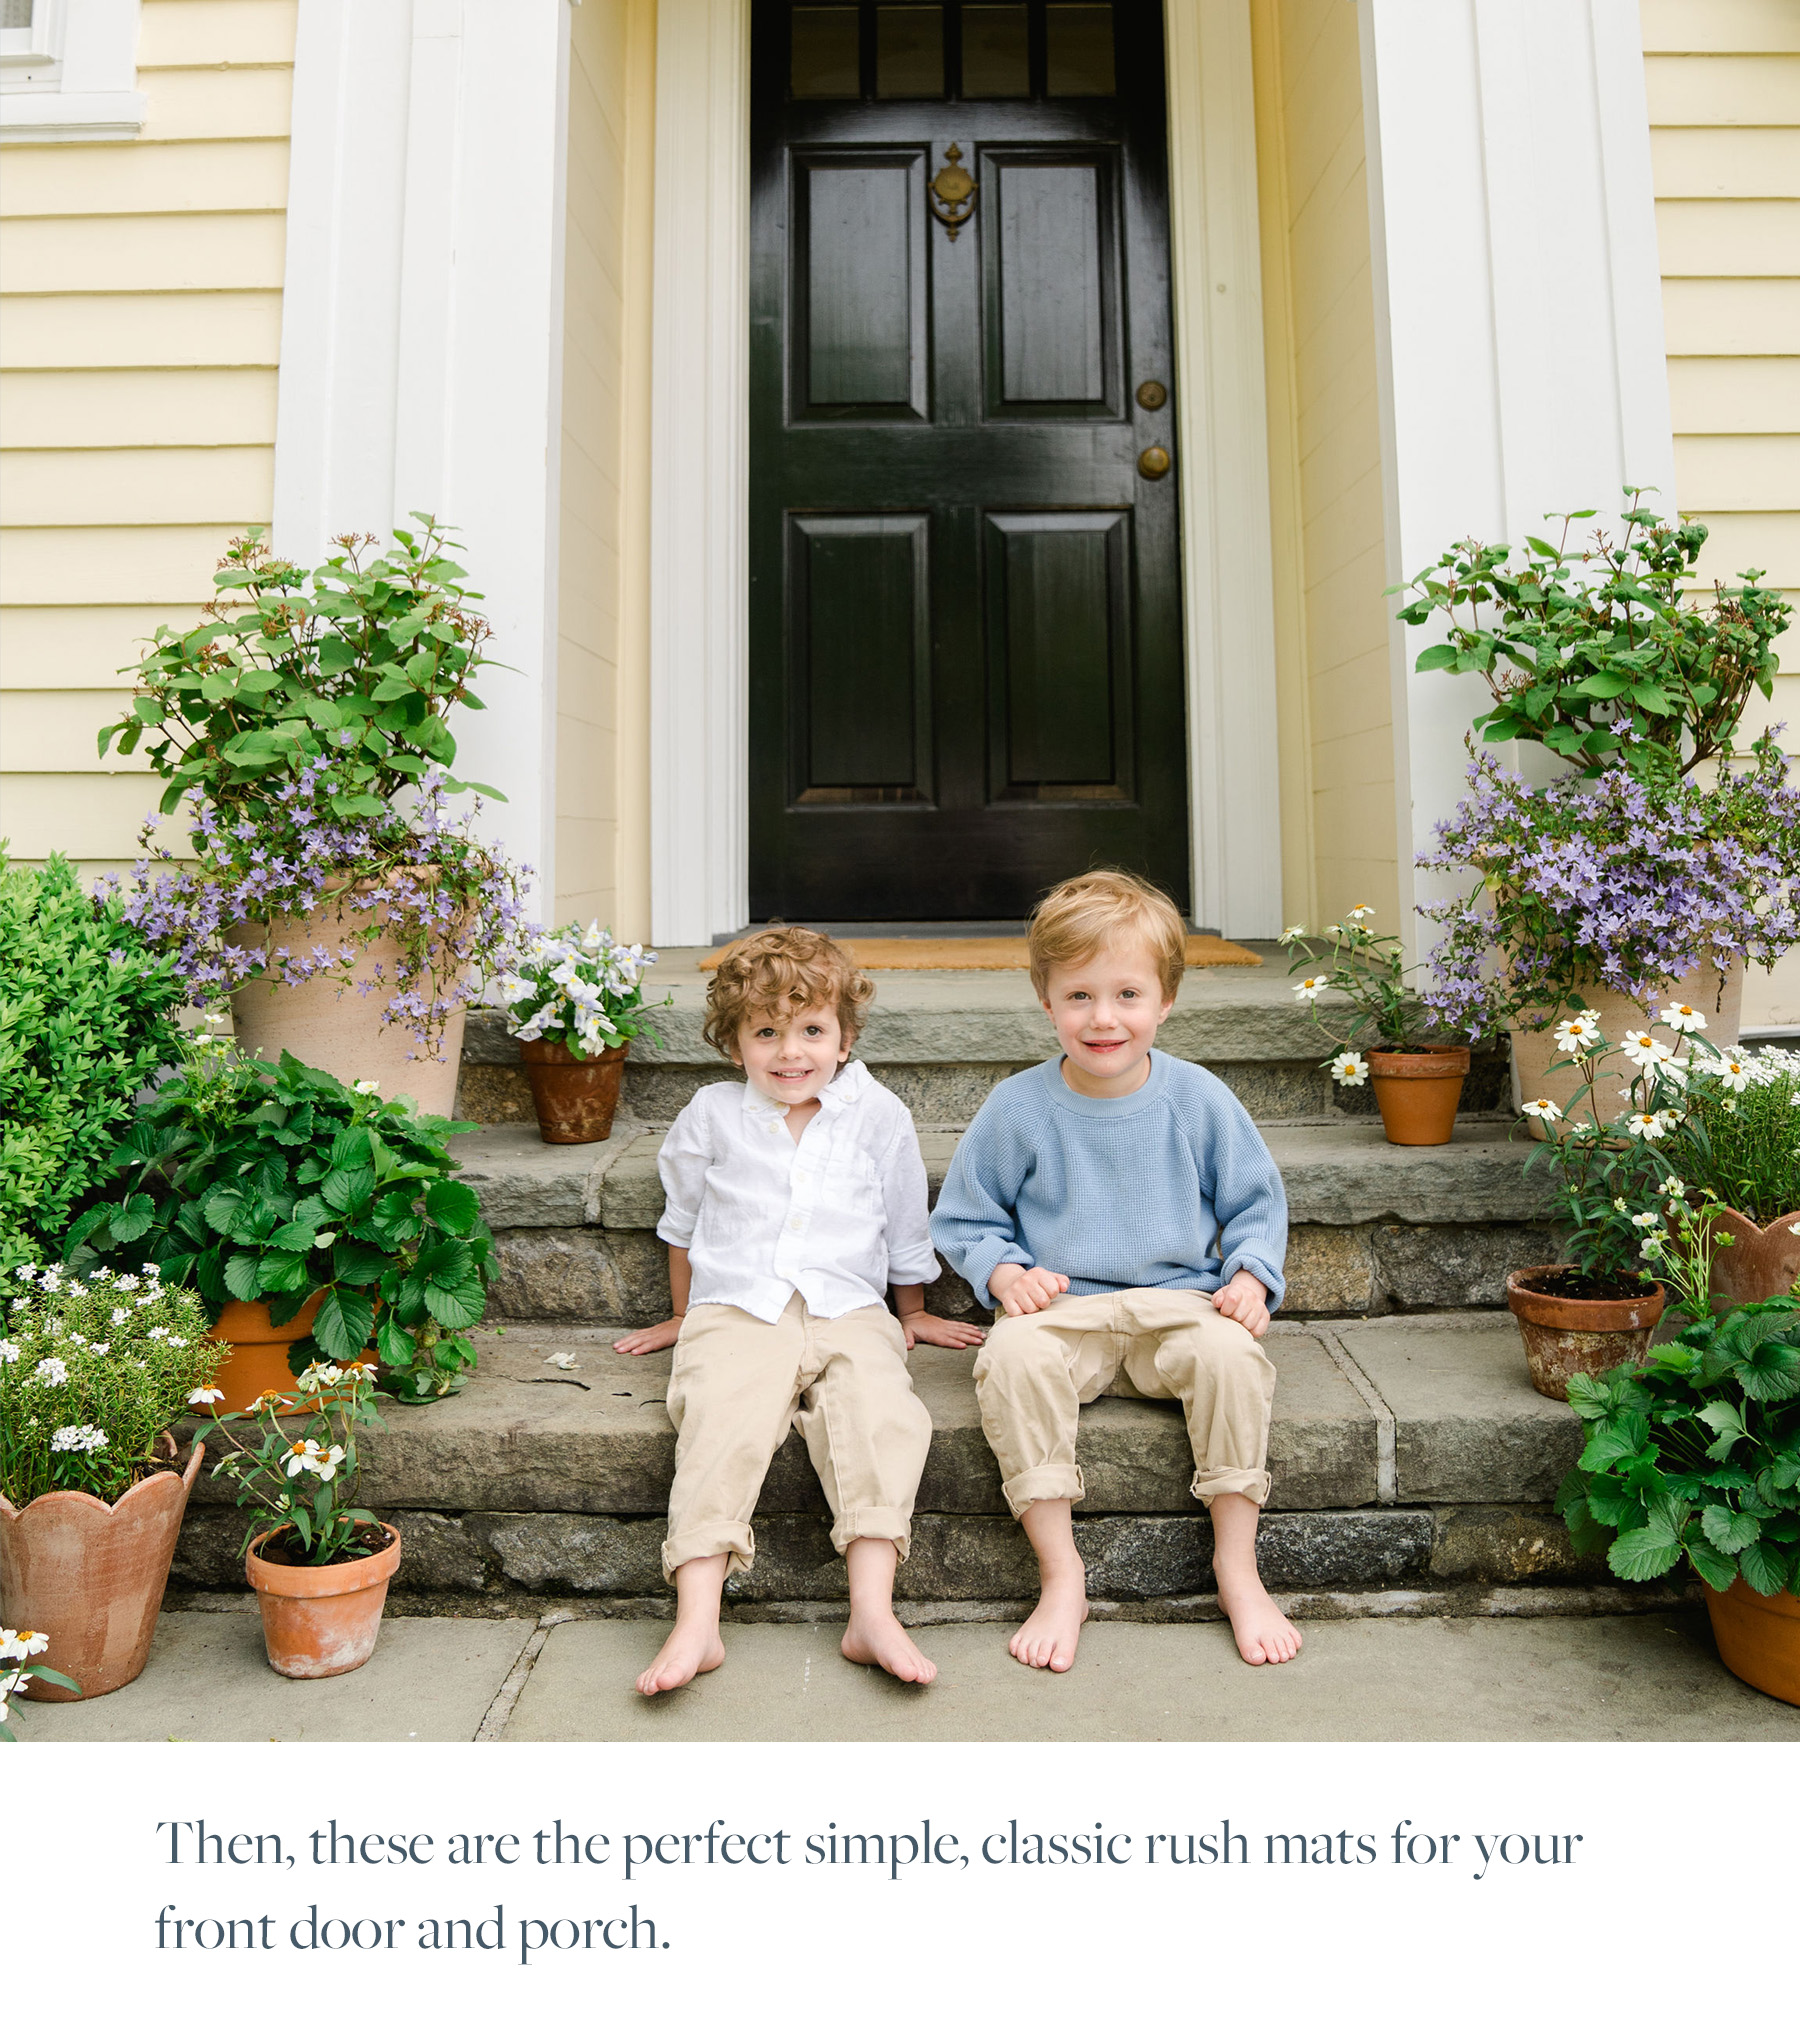 Then, these are the perfect simple, classic rush mats for your front door and porch.